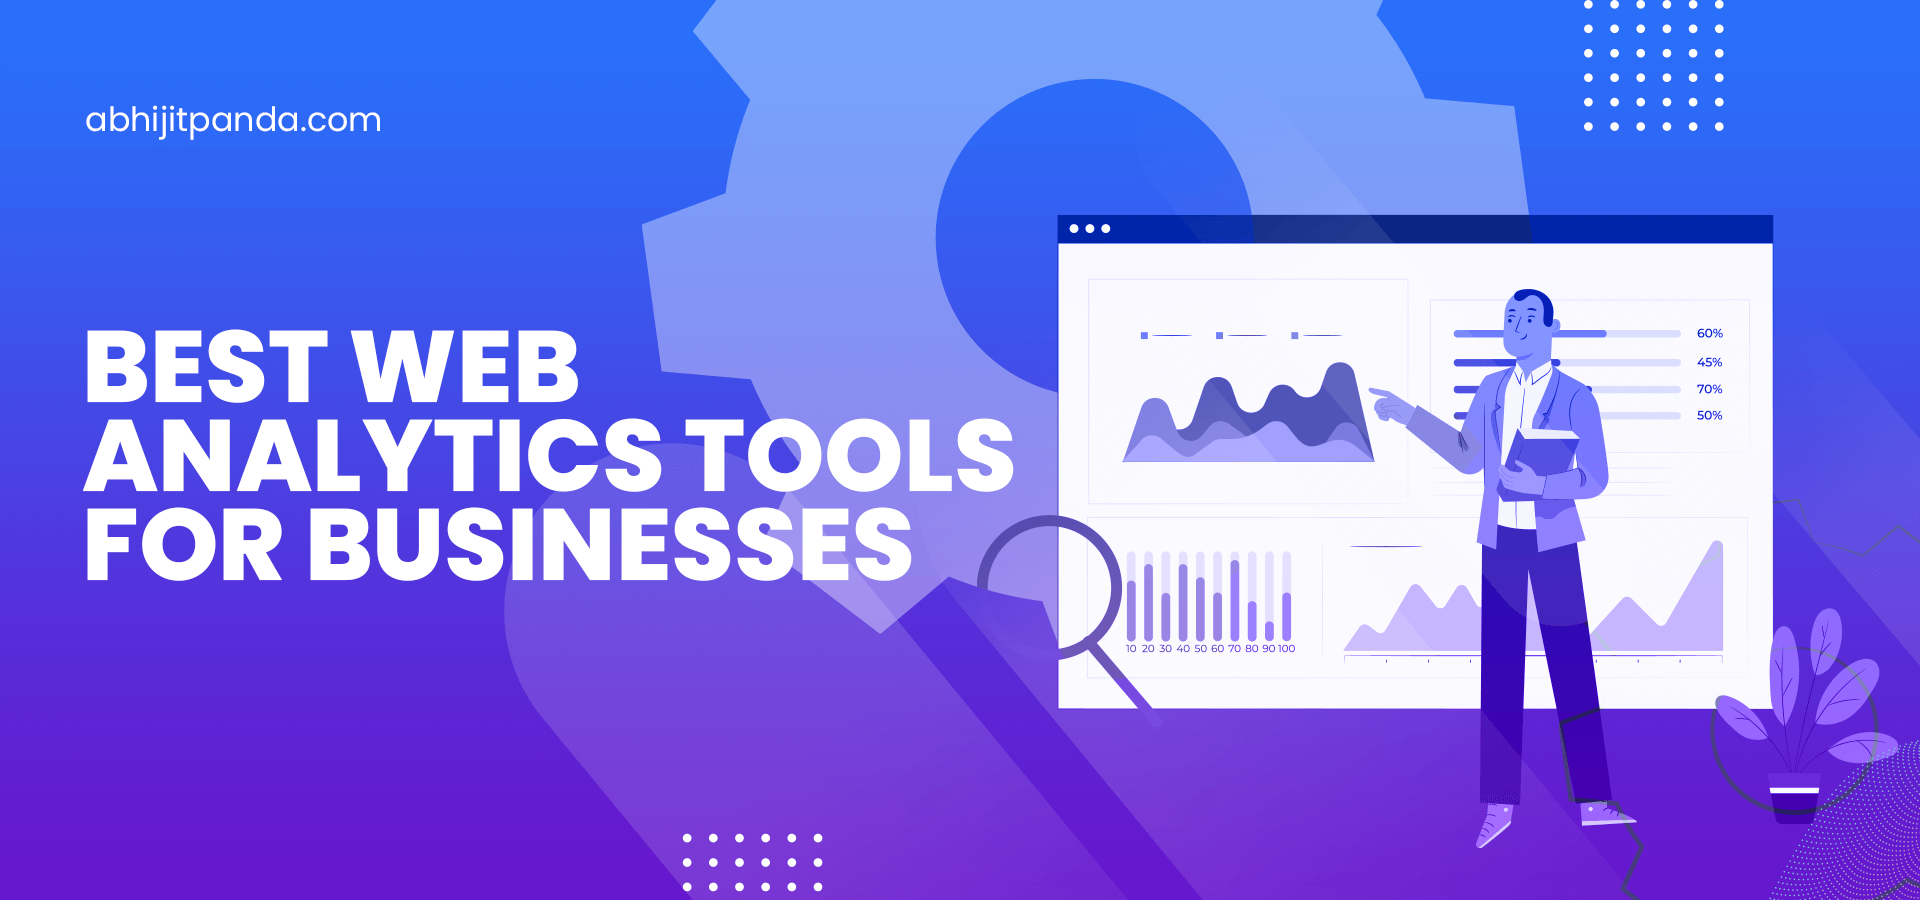 Best Web Analytics Tools for Businesses